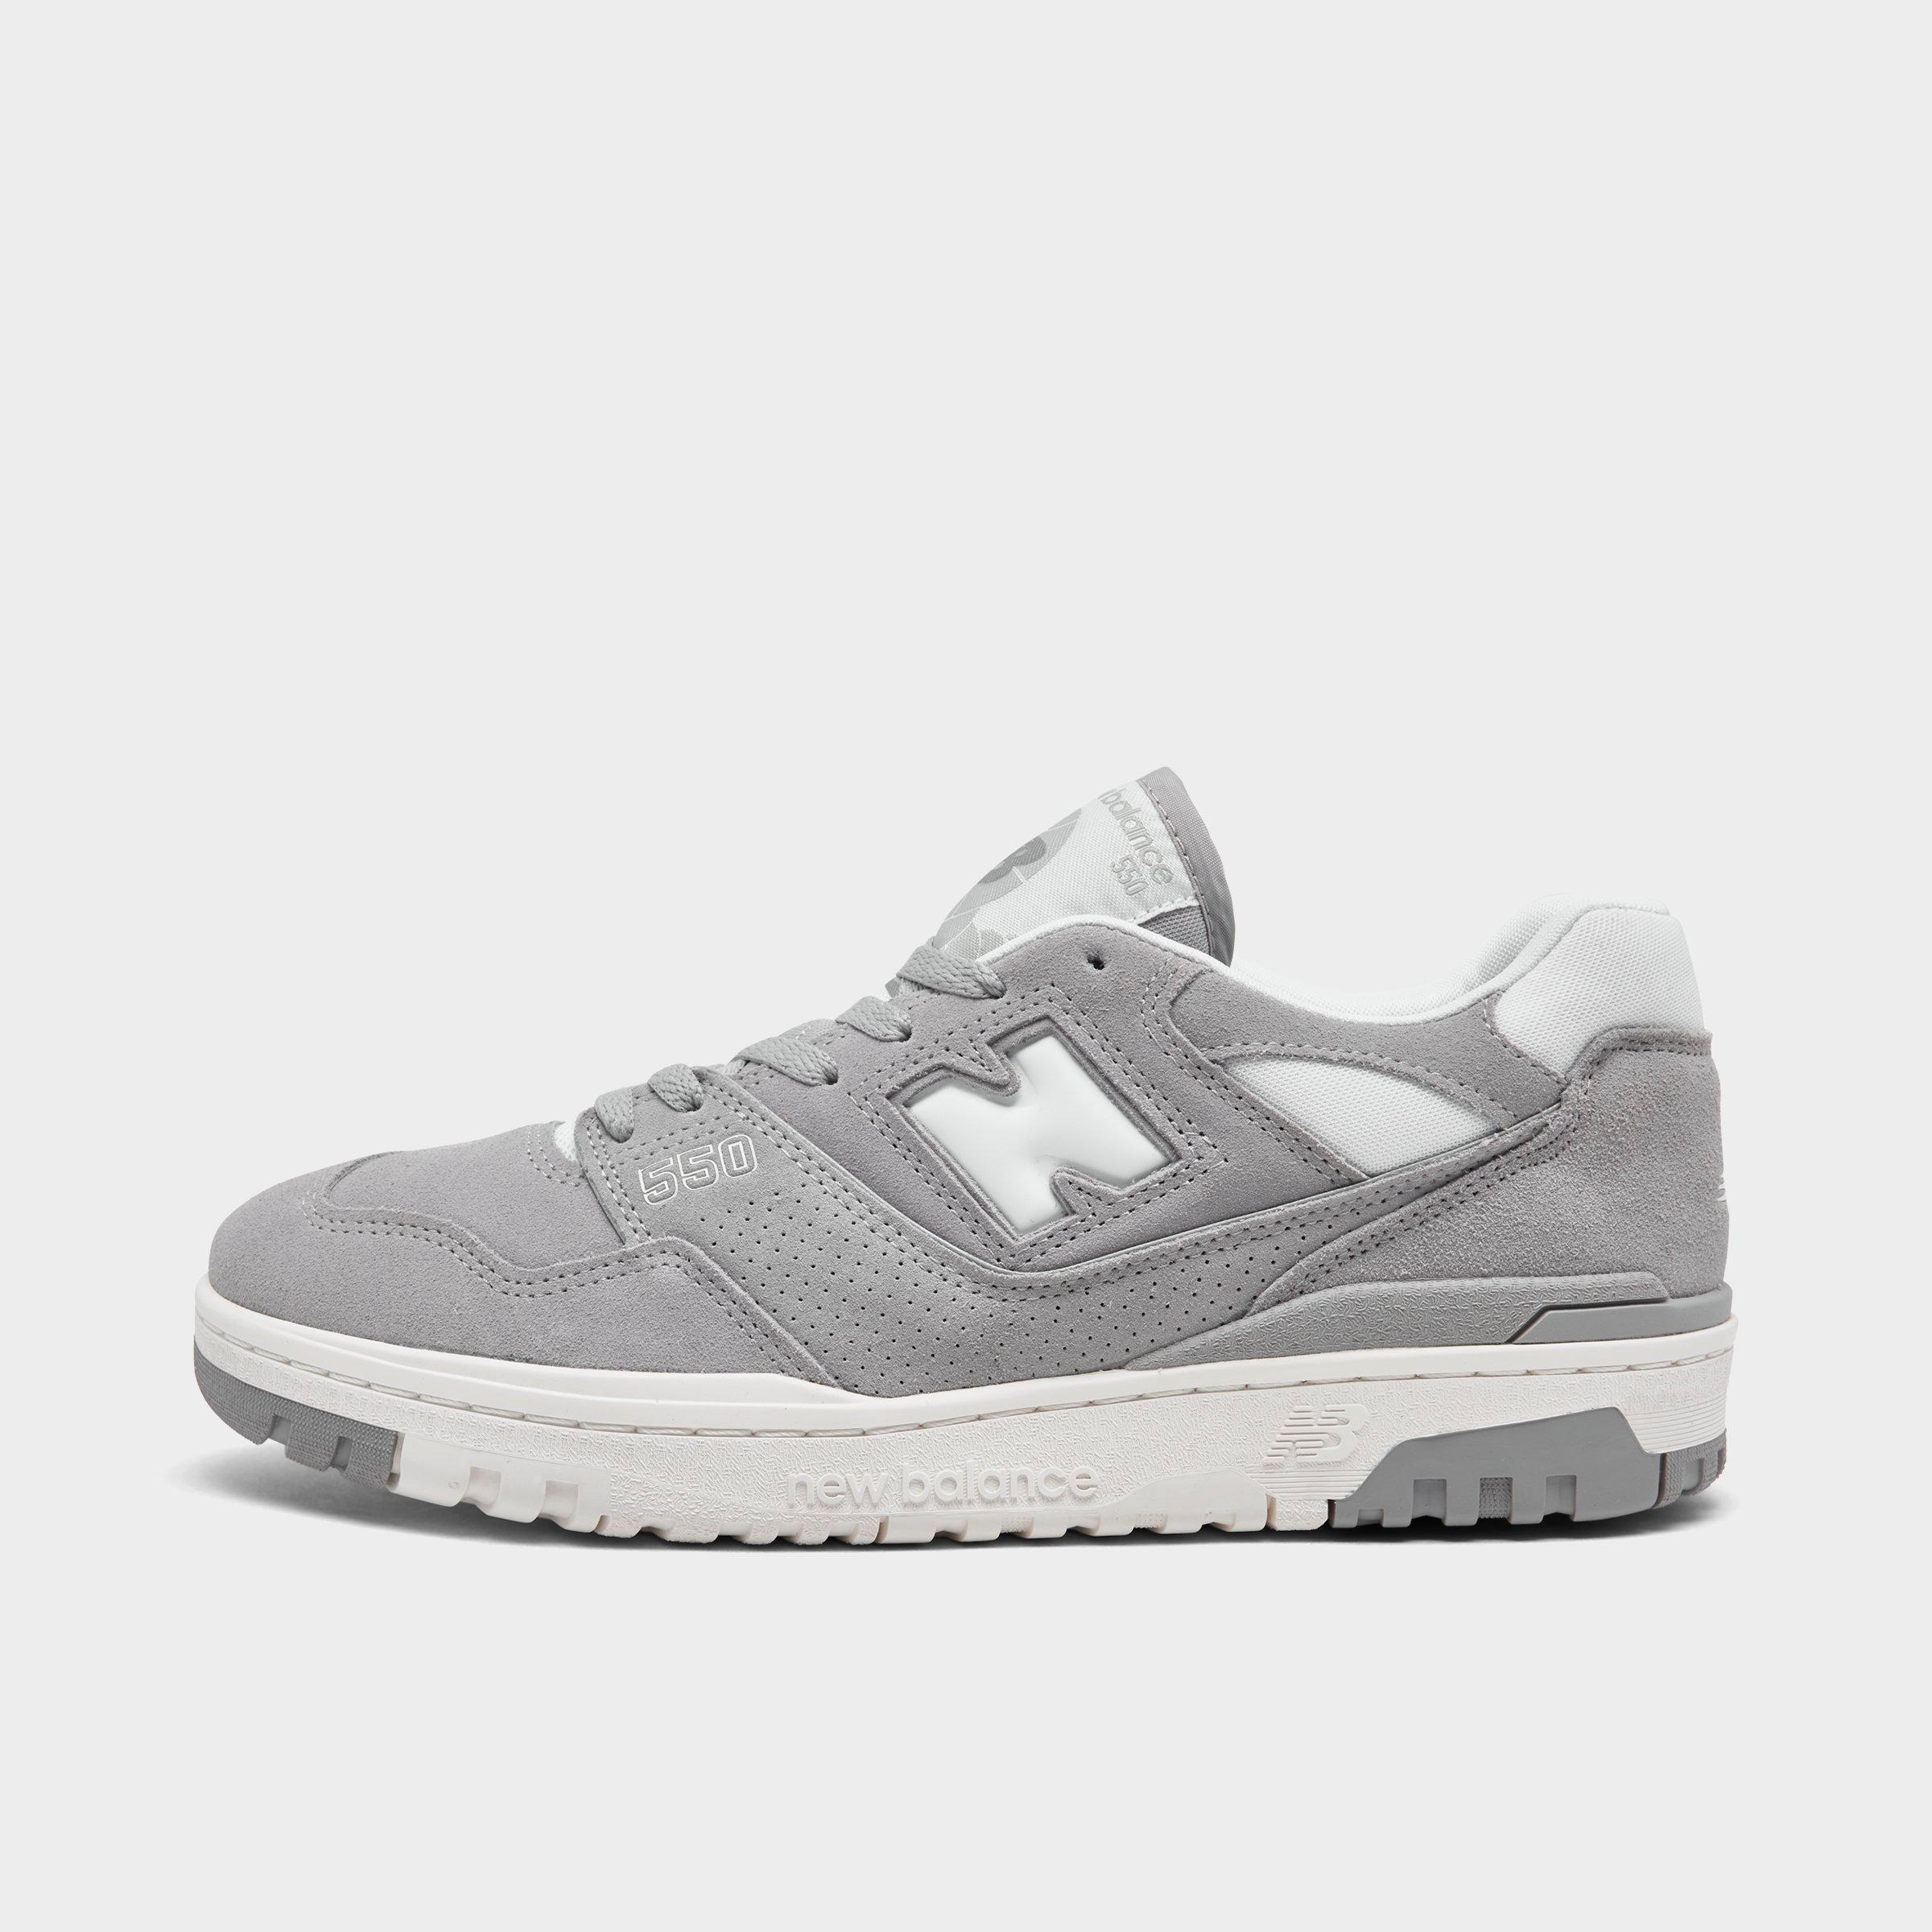 NEW BALANCE NEW BALANCE MEN'S 550 SUEDE CASUAL SHOES